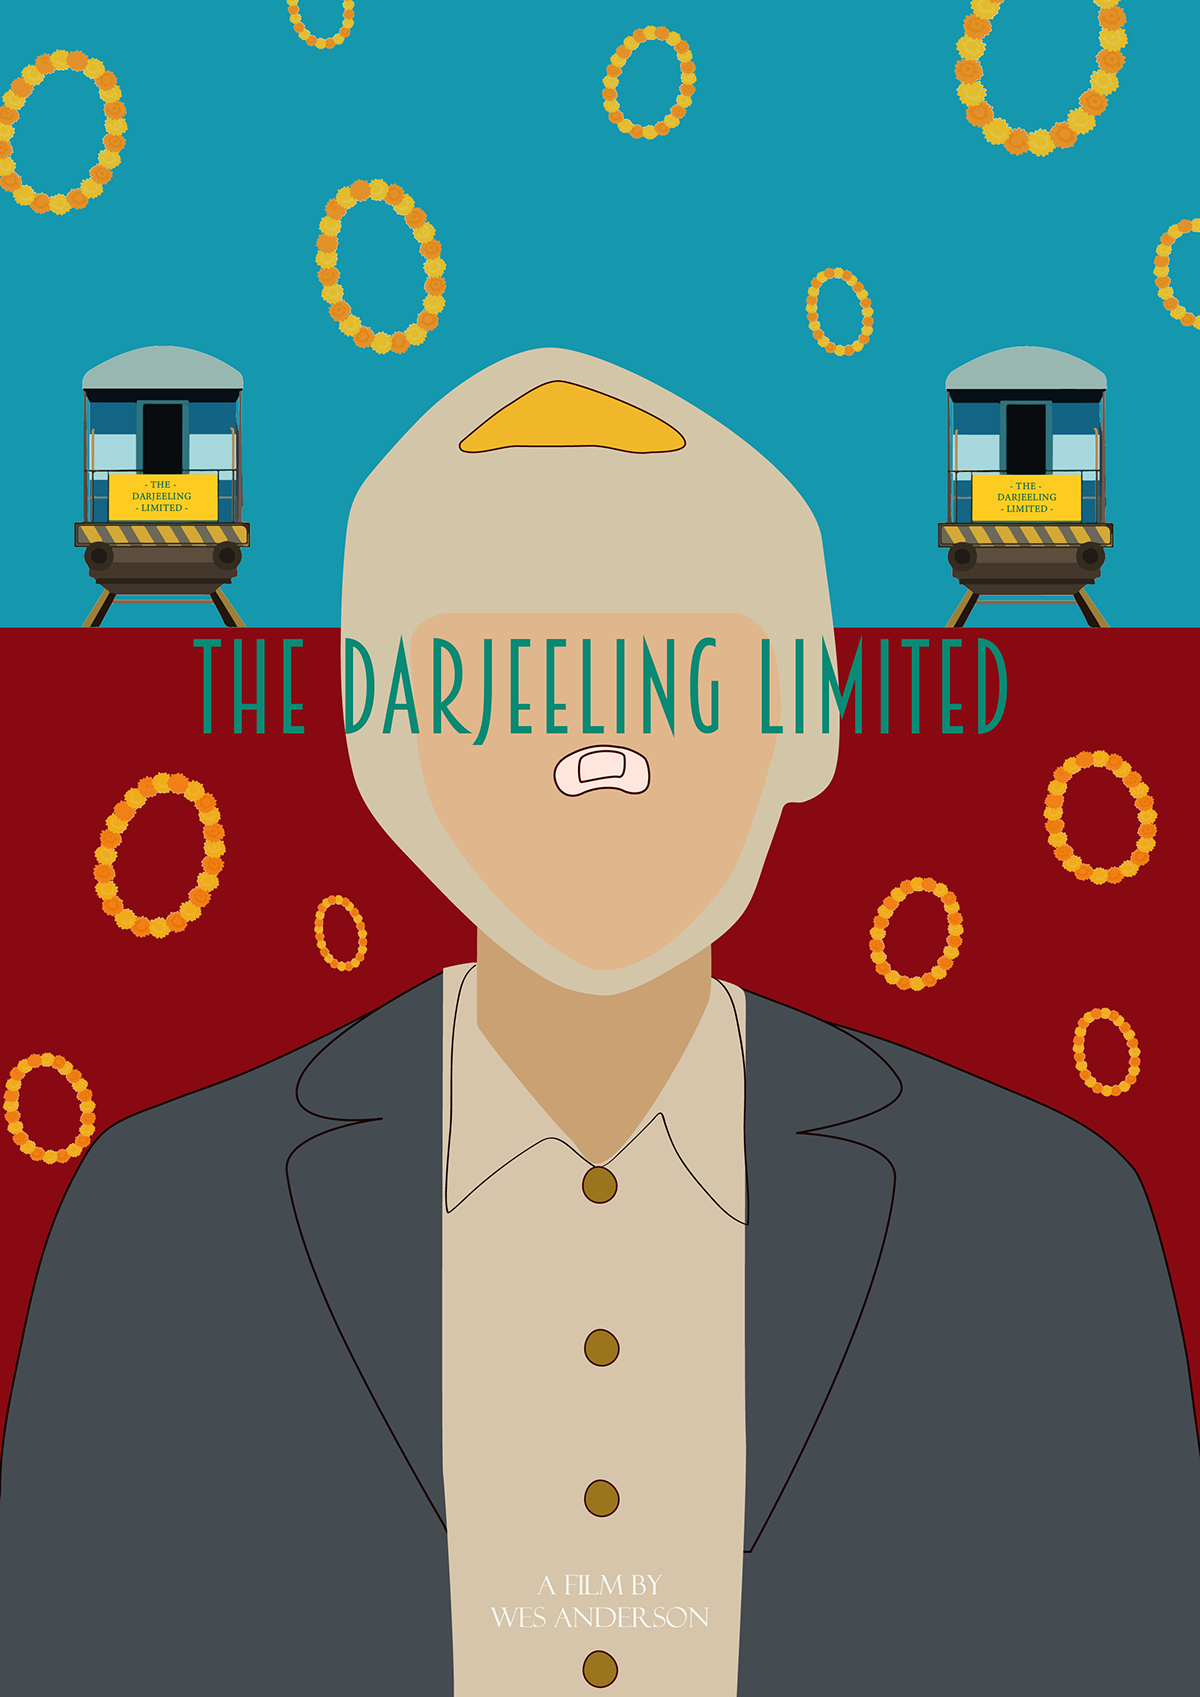 wes anderson movie poster Cinema posters